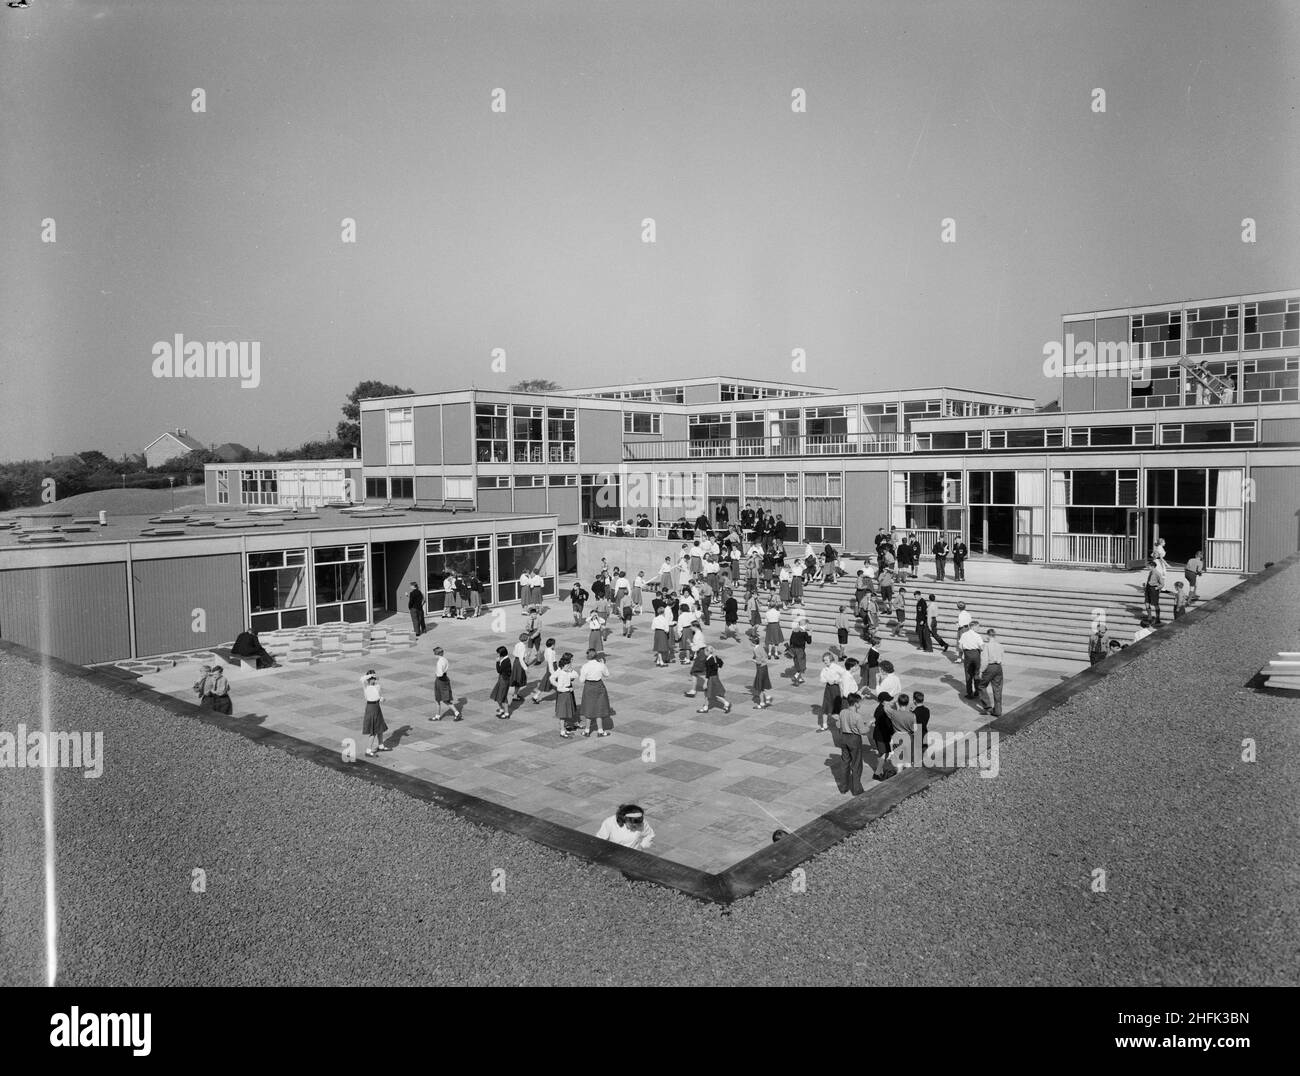 County High School, Gedling Road, Arnold, Gedling, Nottinghamshire, 11/09/1959. A view of the main courtyard at Arnold County High School filled with school children, seen from the roof of the 'houseblock' to the south-east. The school operated a house system of three houses for sports, scholastic and social activities. Rooms for housemasters, pupil dining rooms and kitchens were contained in the 'houseblock' that surrounded the central courtyard on three sides. This photograph featured in the October 1959 issue of Team Spirit, the Laing company newsletter in a story documenting the project's Stock Photo